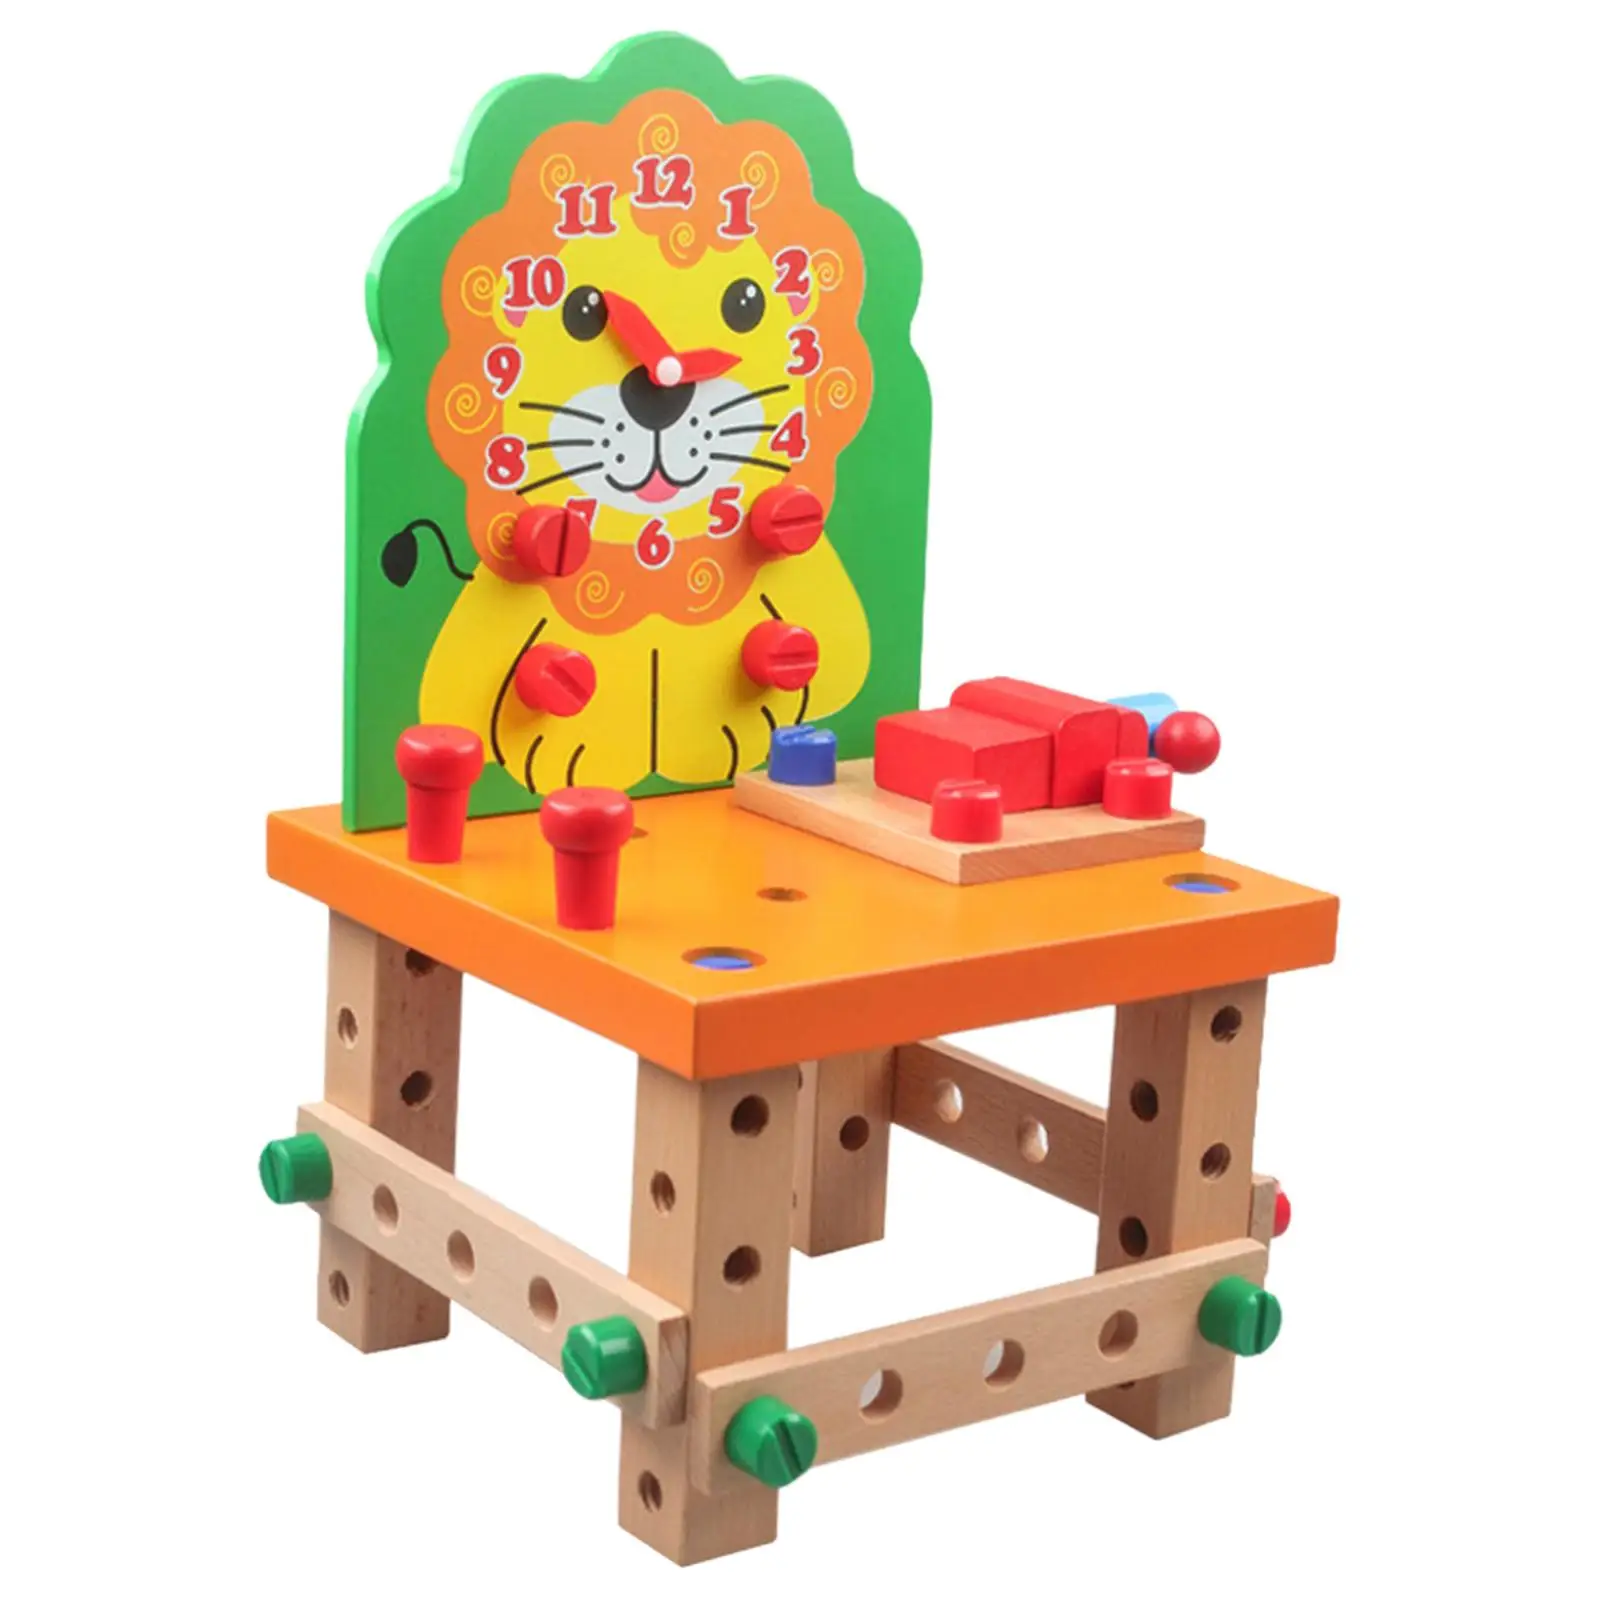 Wooden Chair Models Construction Play Set Montessori Toys with Tools Wooden Assembling Chair for Children Toddler Gifts